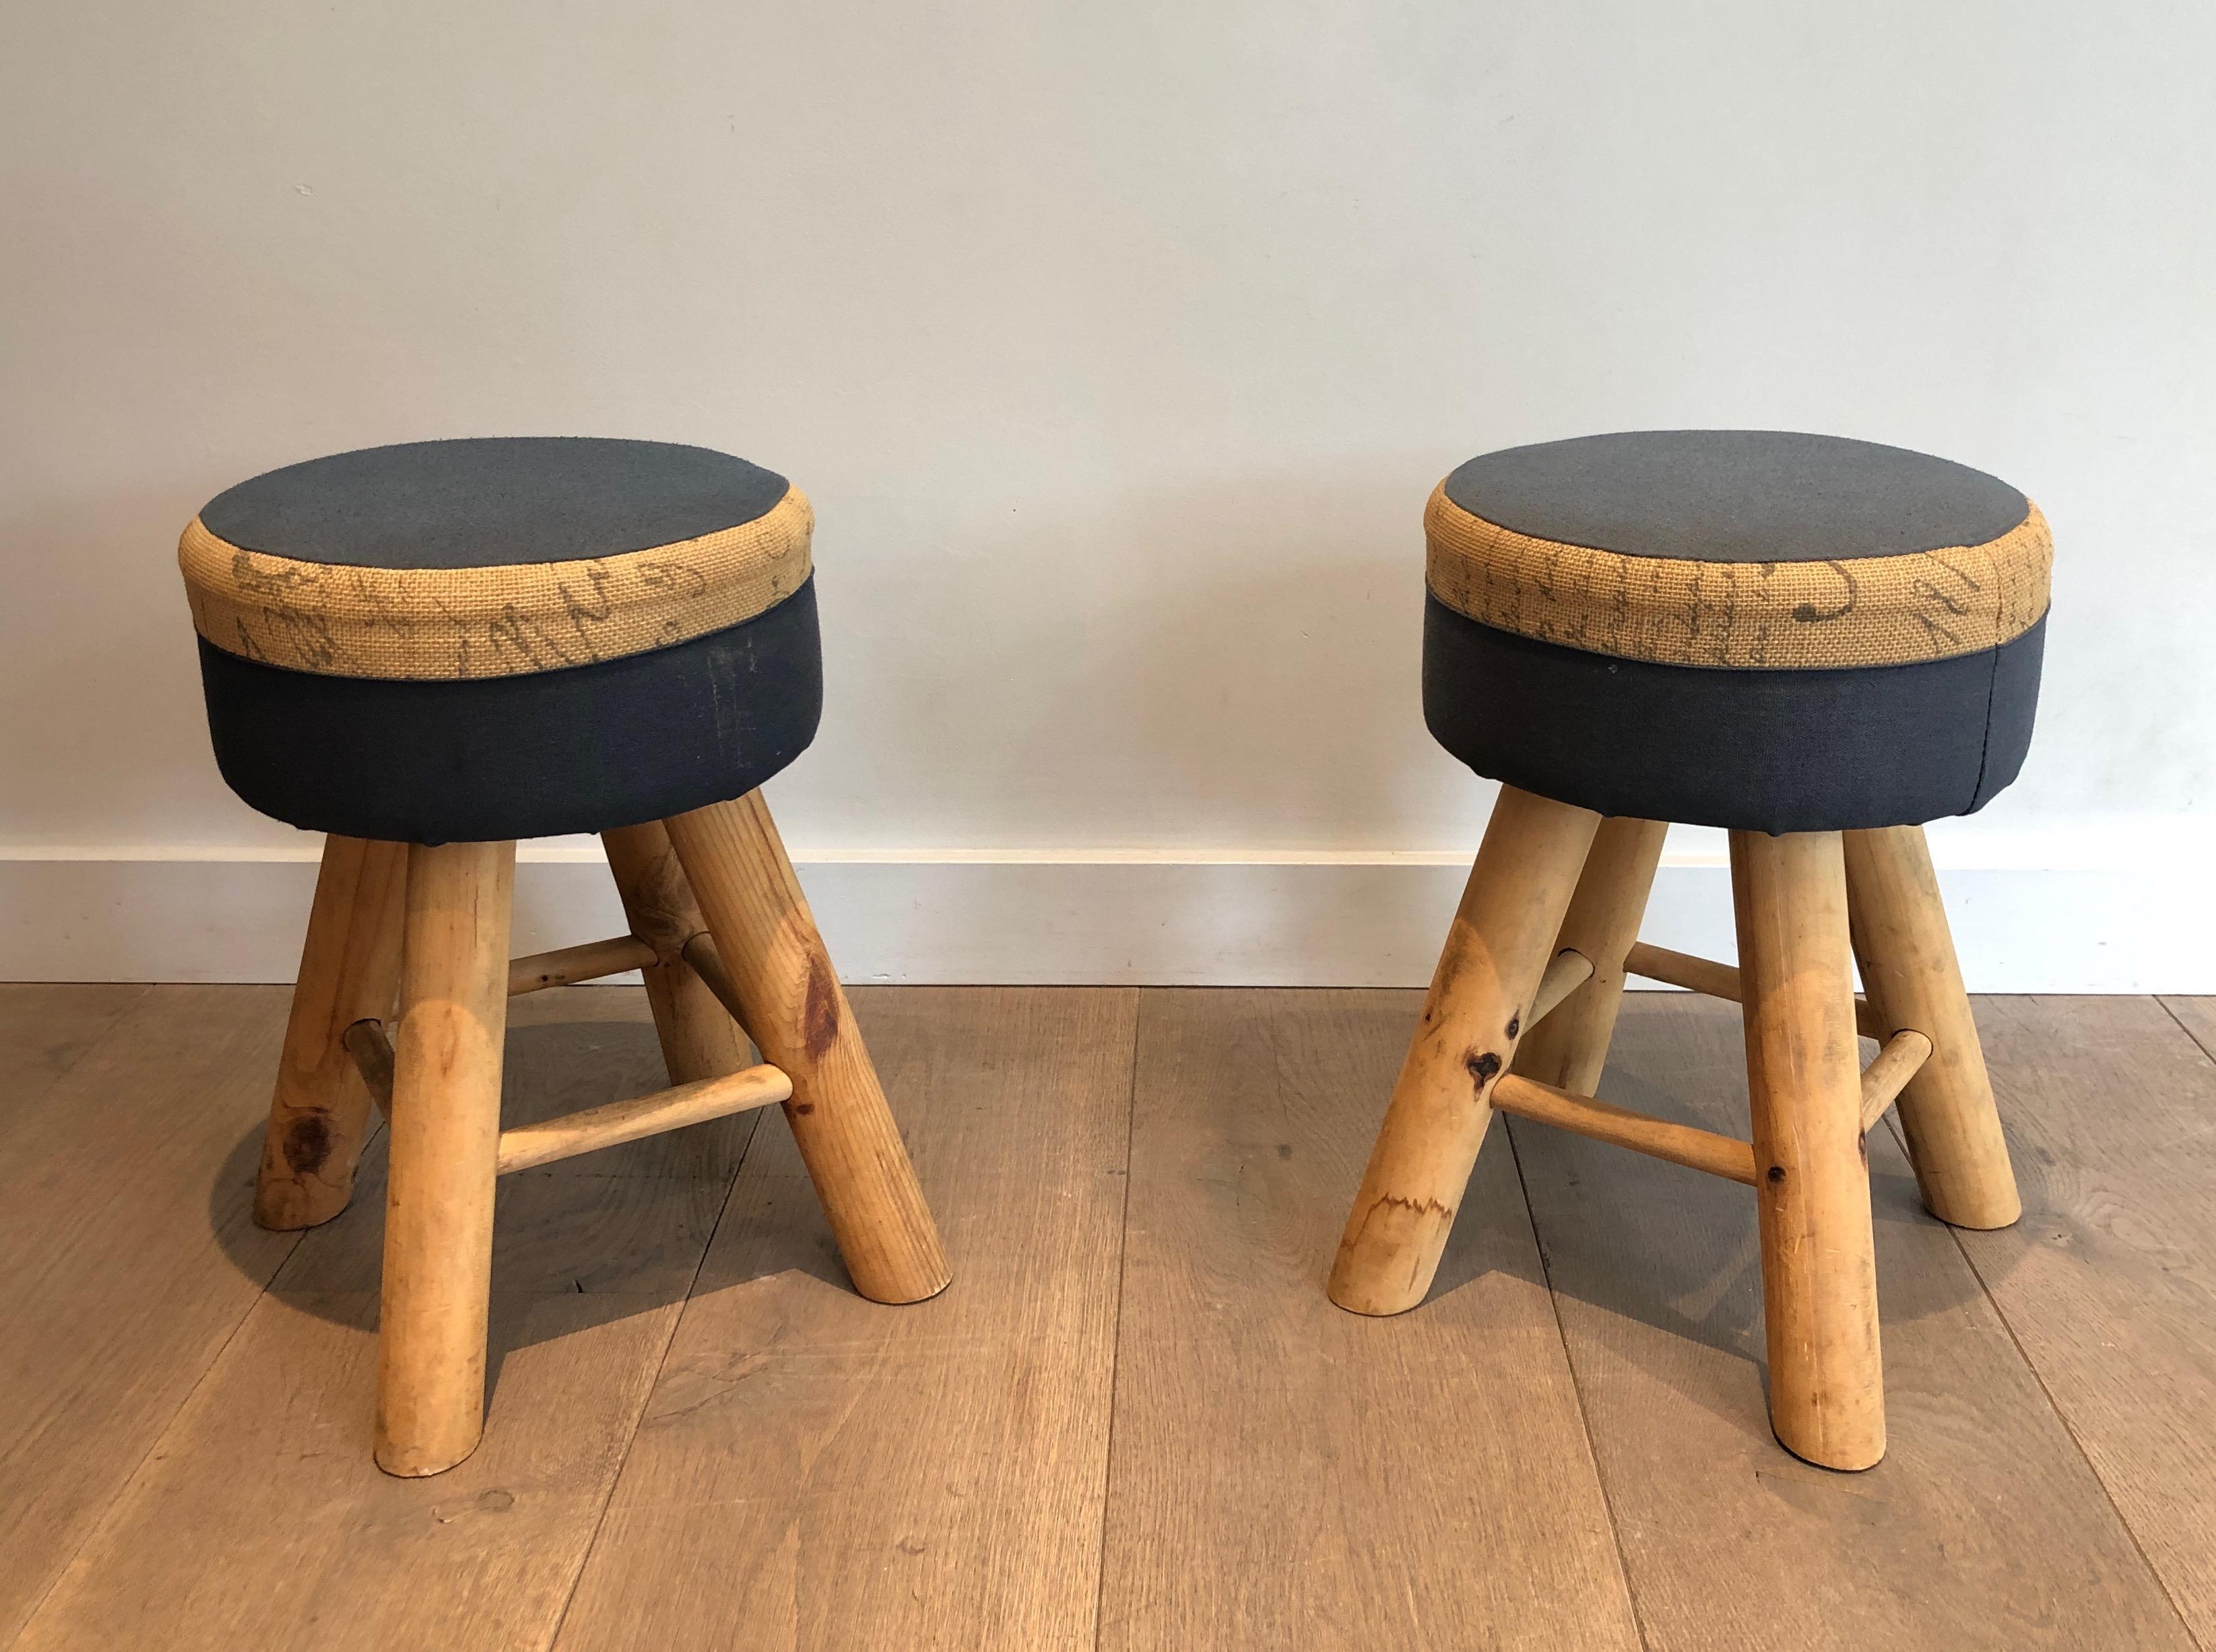 Pair of Pine Stools, French Work, circa 1970 For Sale 6